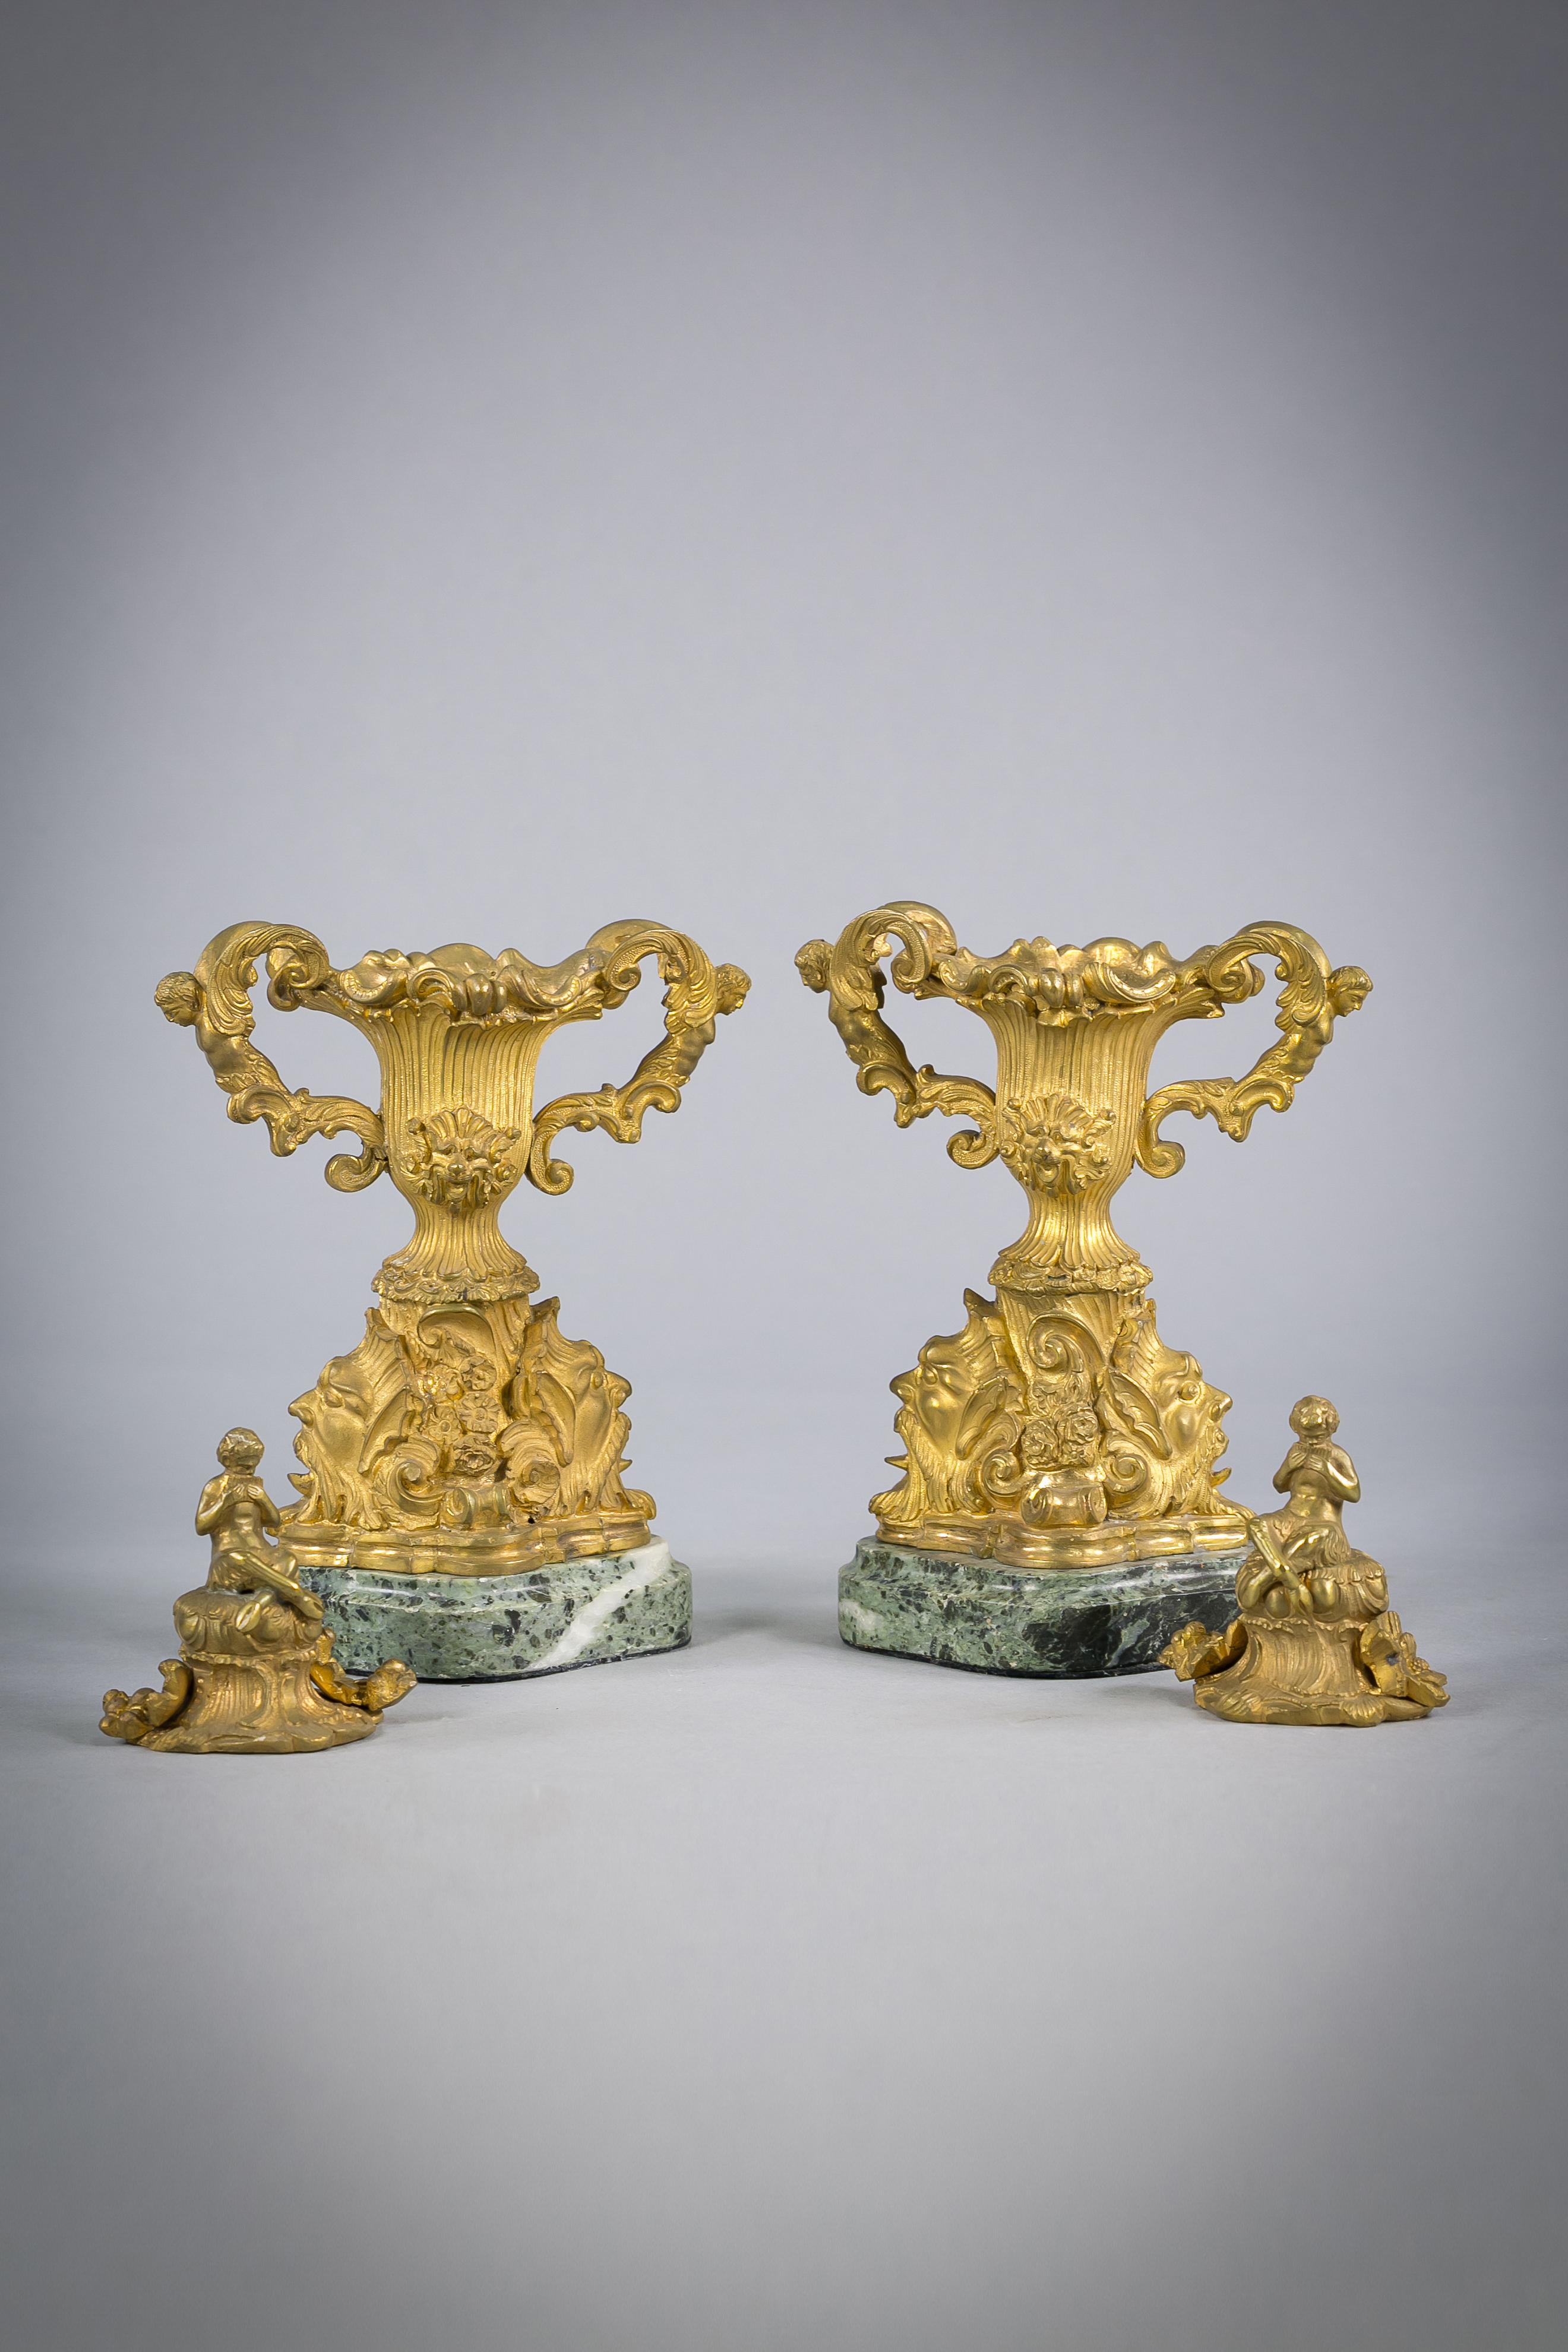 Pair of gilt bronze two handled covered urns on marble bases, French, circa 1890.